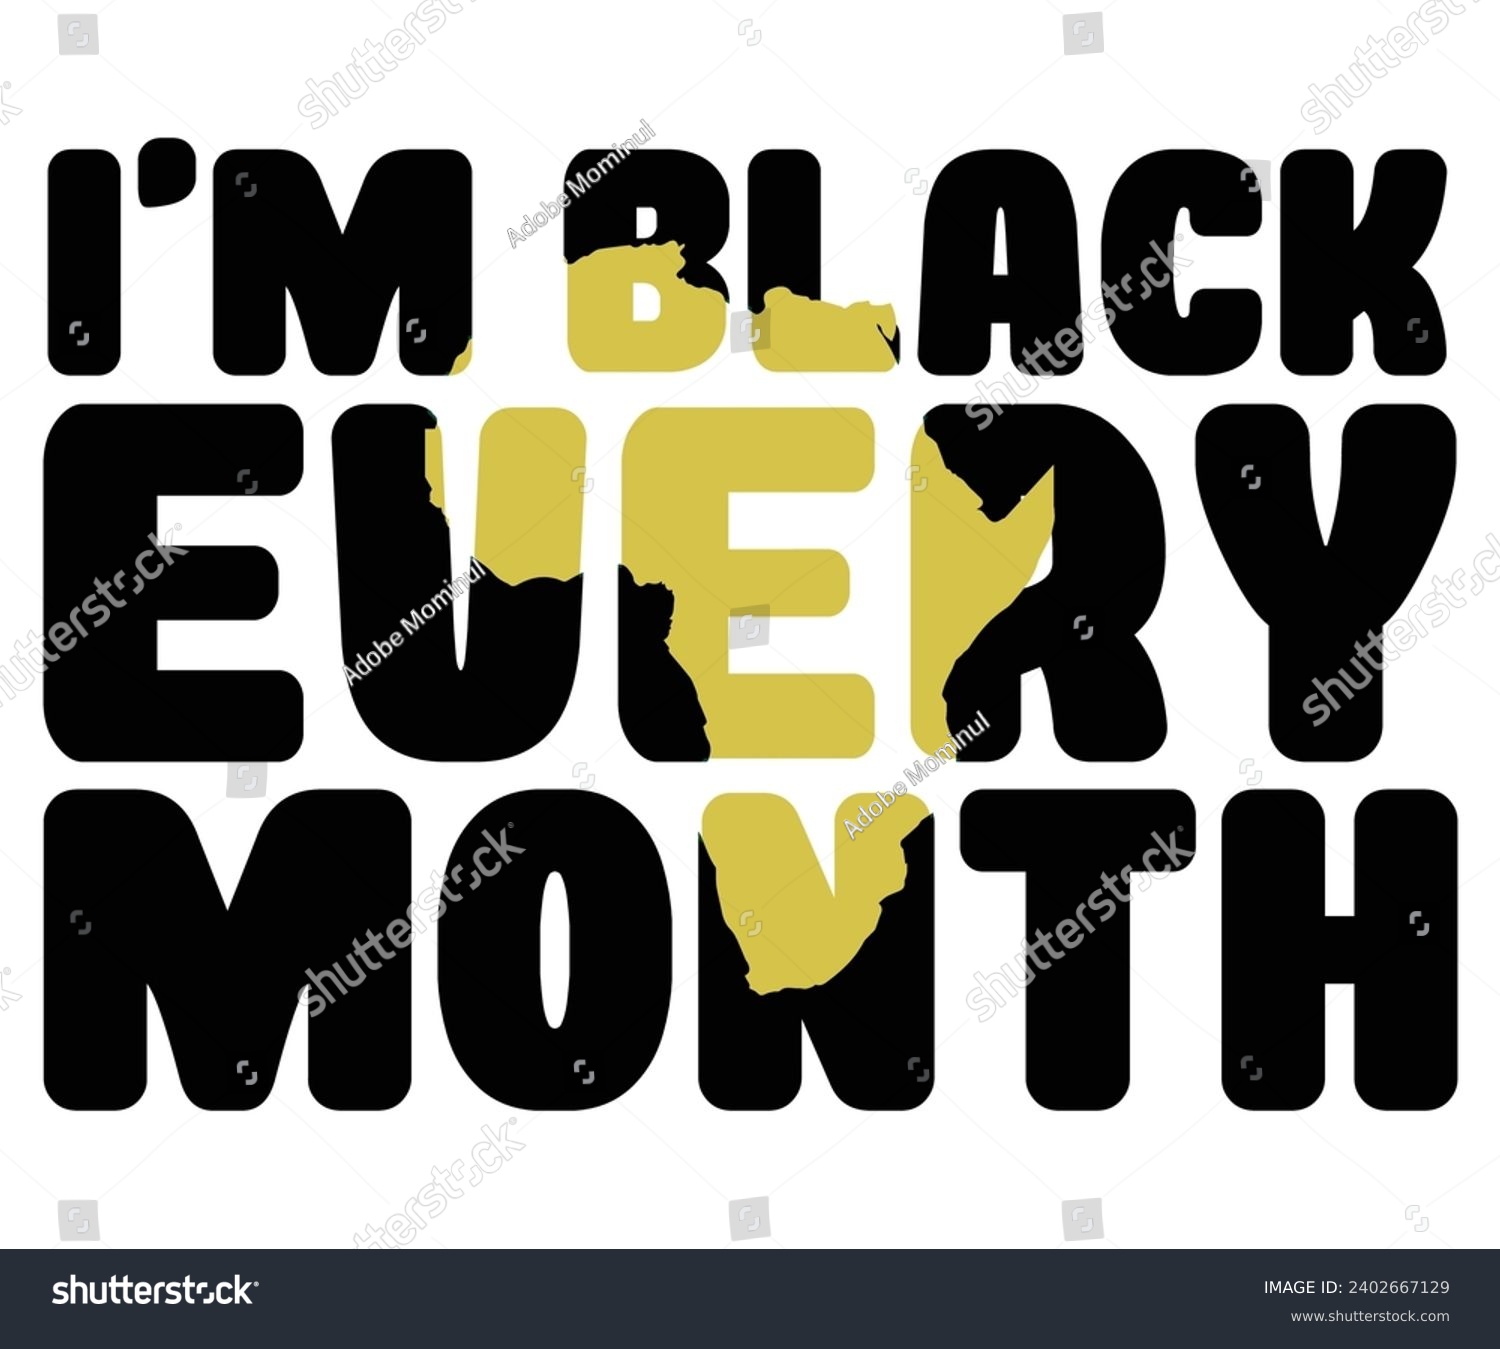 SVG of  I Am Black History Month Svg,Black History Mont Svg,Retro,Juneteenth Svg,Black History Quotes,Black People Afro American T shirt,BLM Svg,Black Men Woman,In February in United States and Canada svg